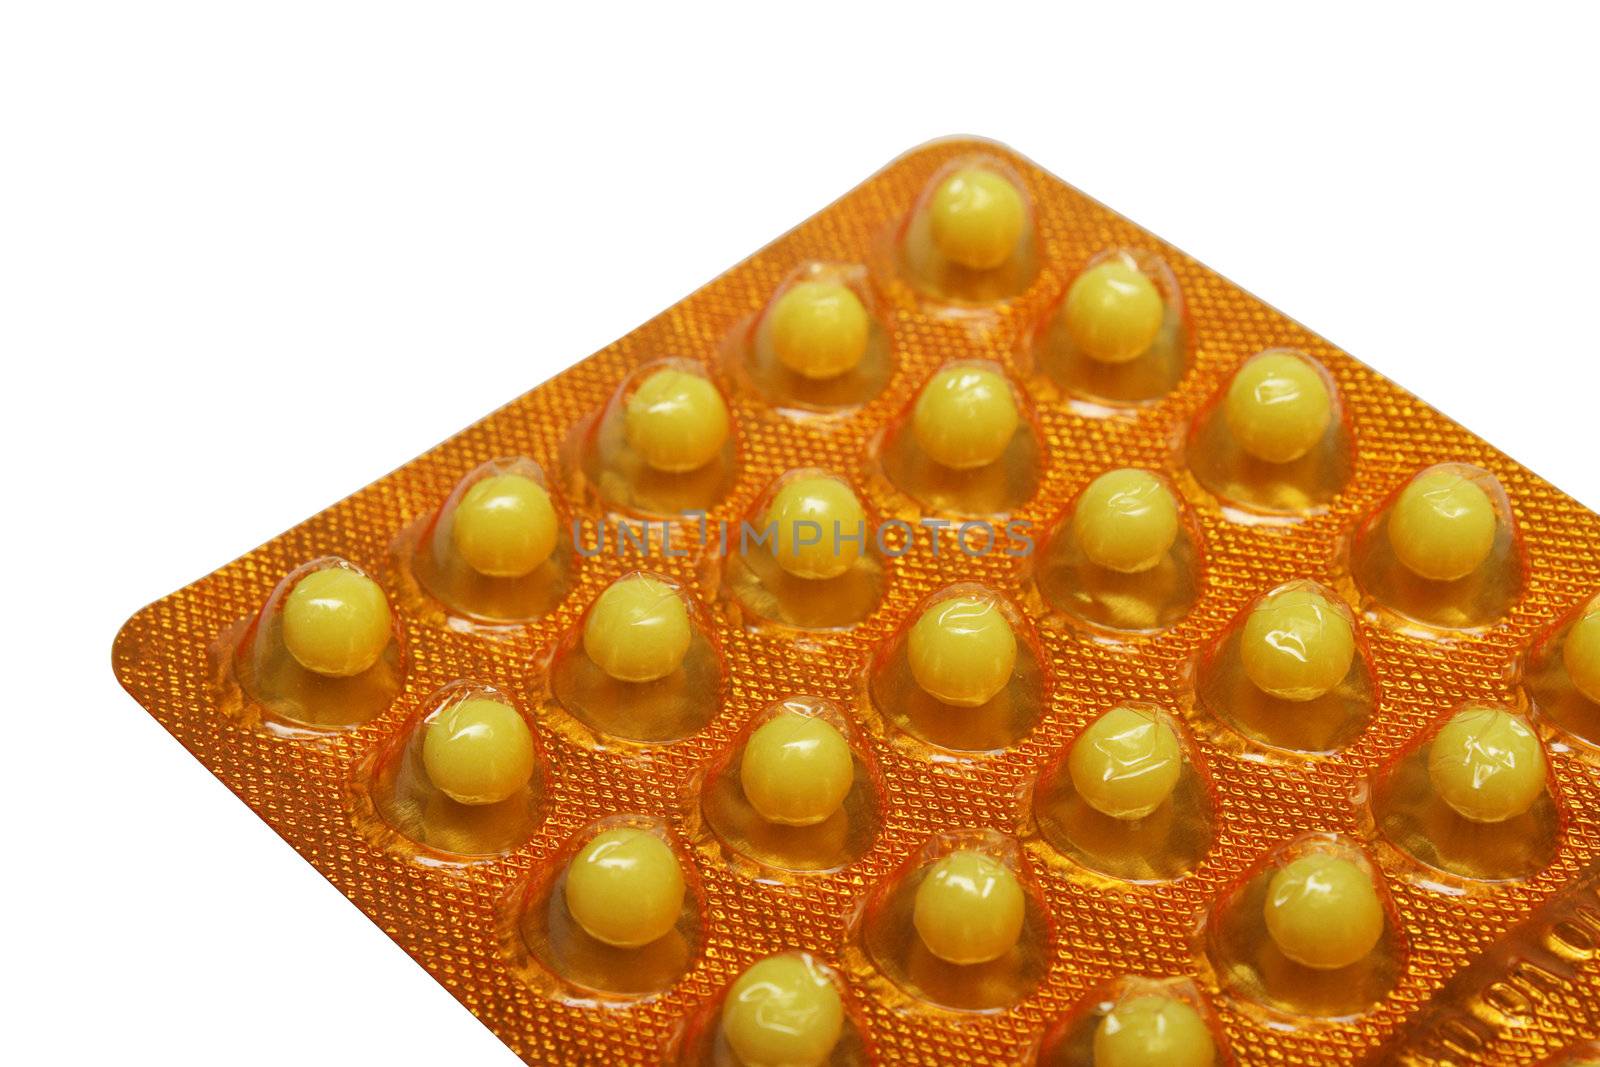 Vitamin C pills in the pack on white background